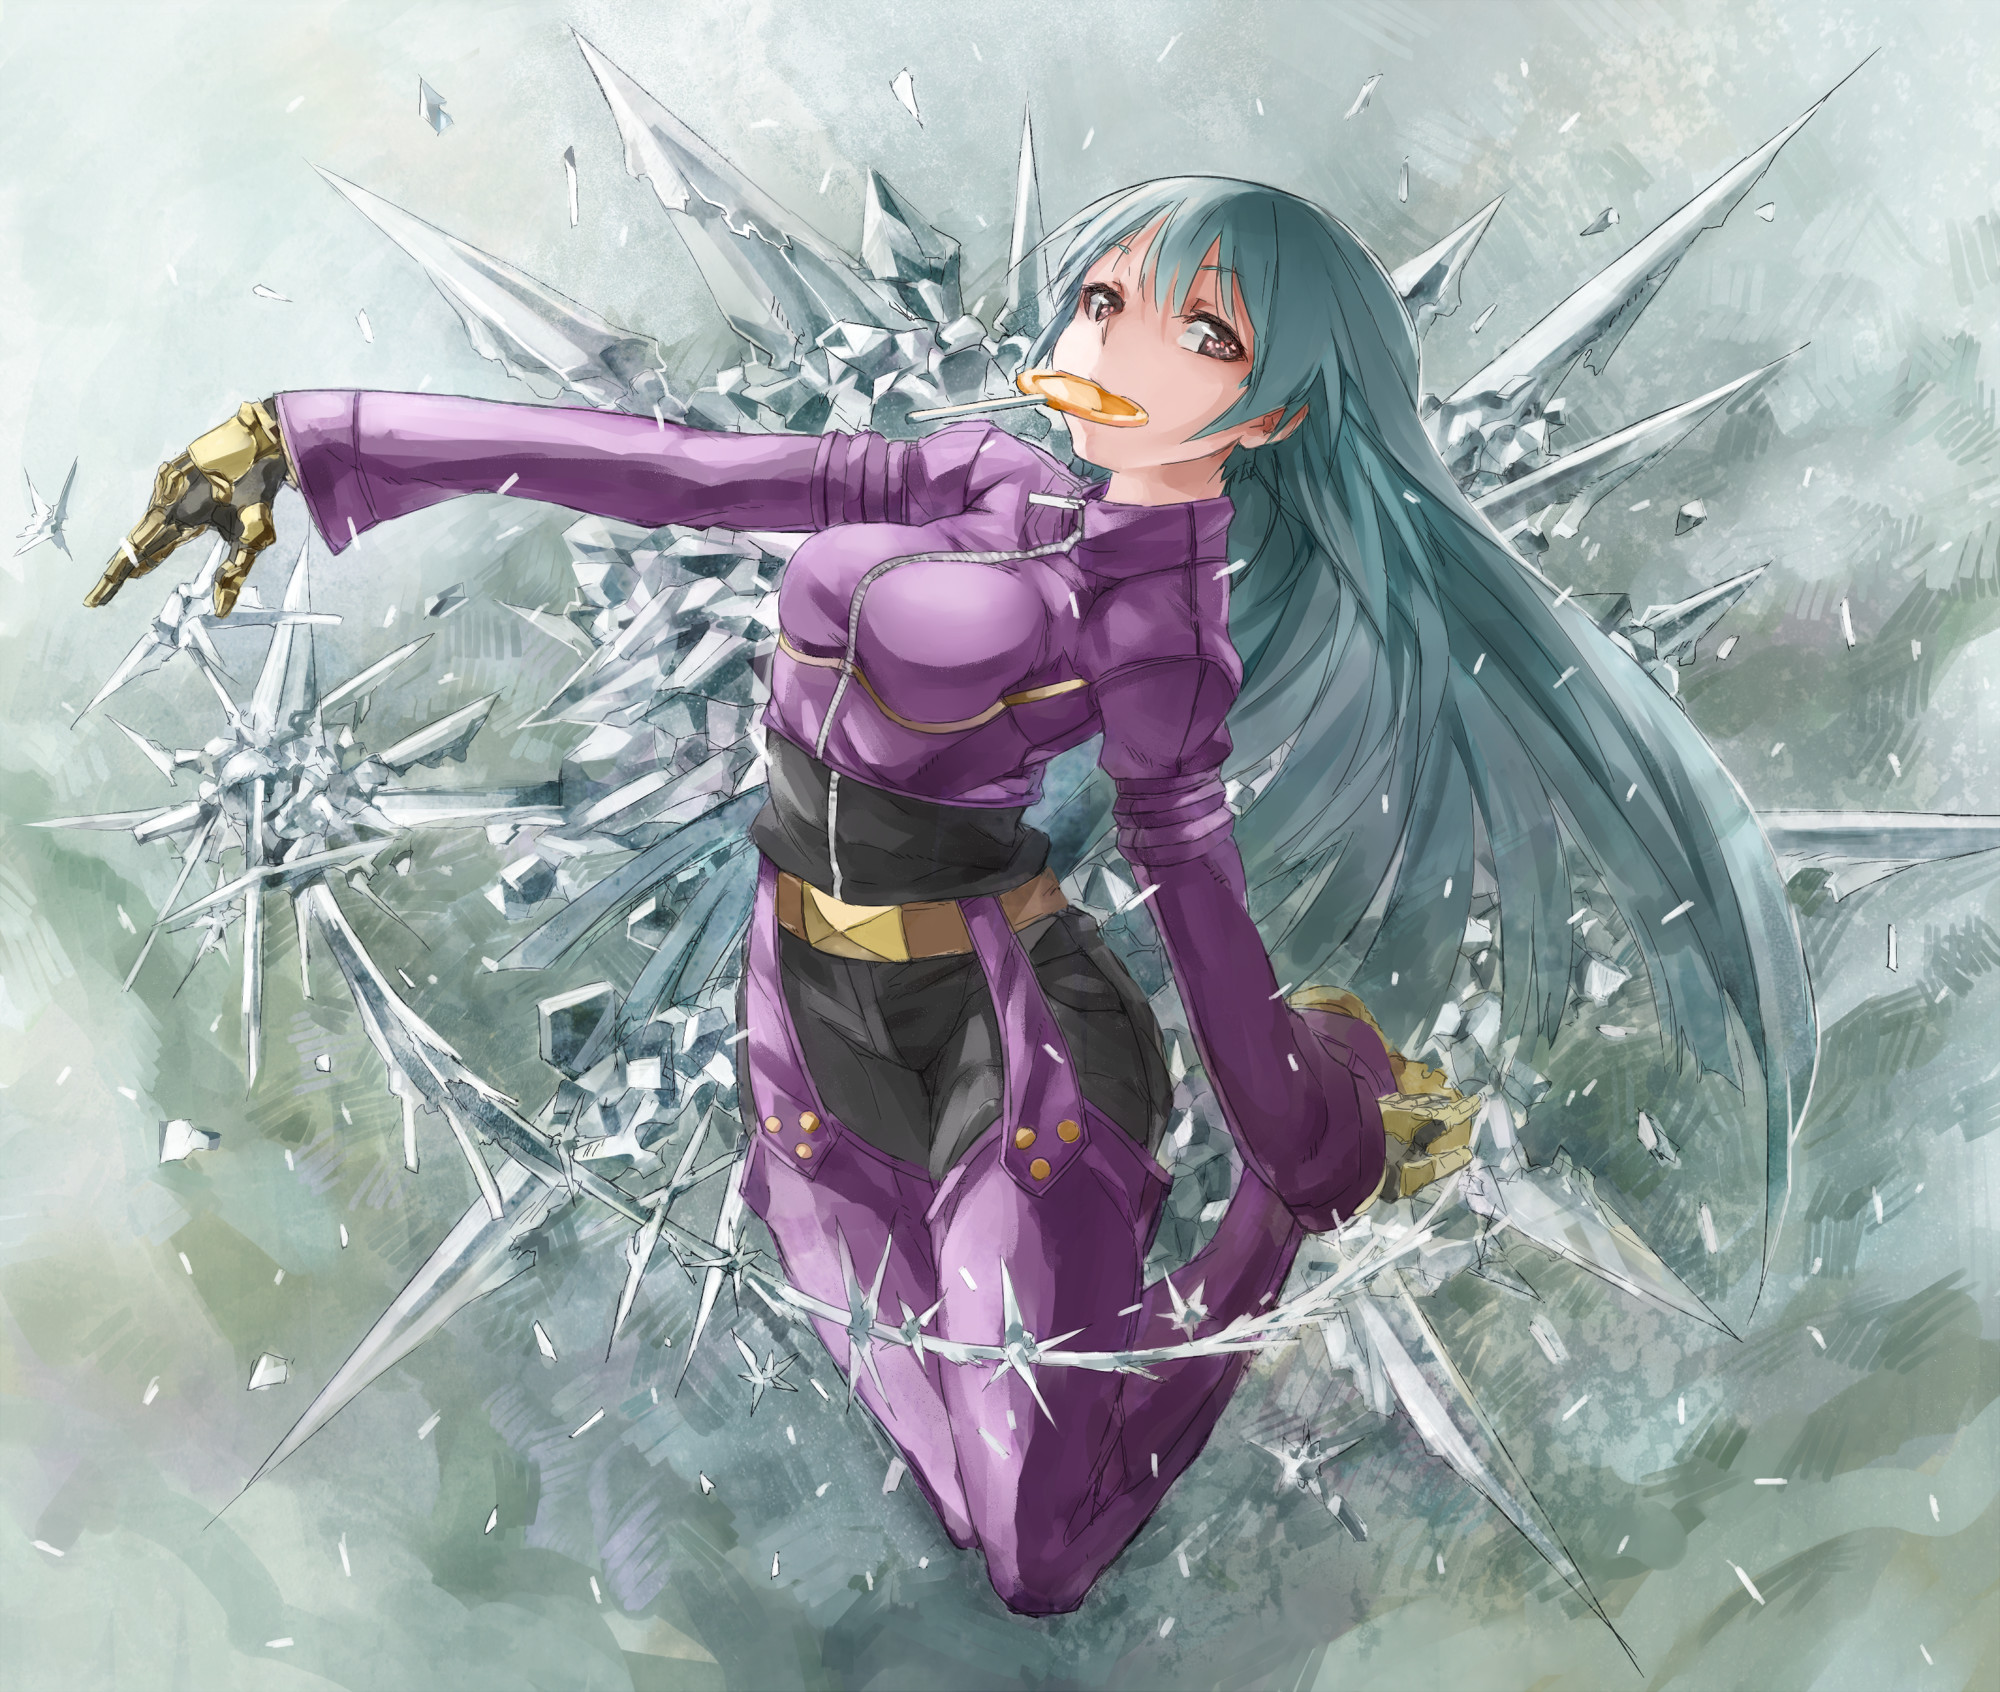 2000x1692 King of Fighters - Kula Diamond | Press Any Button to Start | Pinterest |  Gaming, Anime and Video games